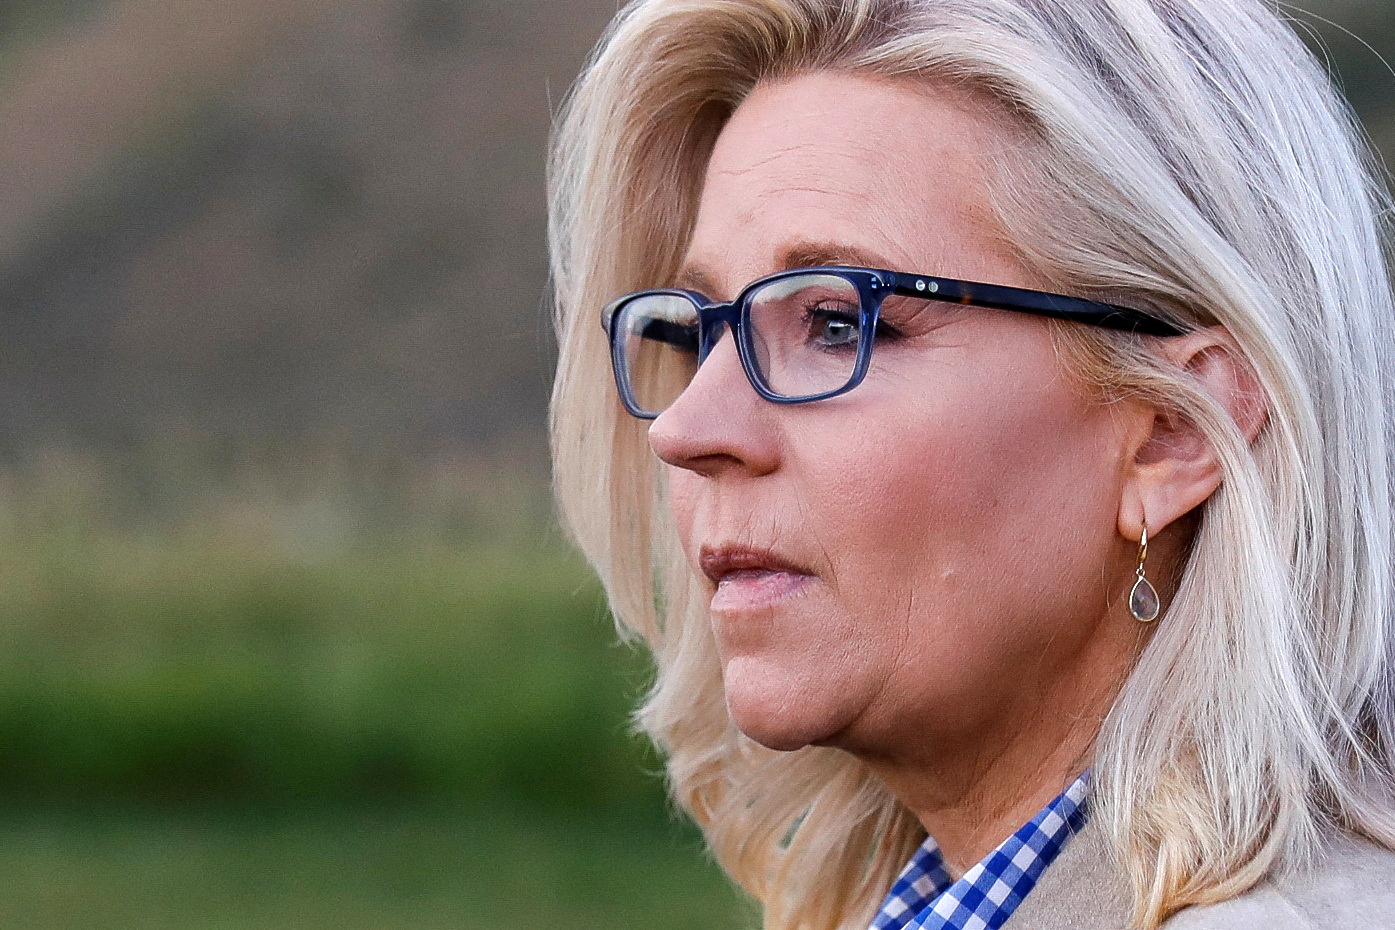 PHOTO: Rep. Liz Cheney looks on during her primary election night party in Jackson, Wyoming, August 16, 2022.